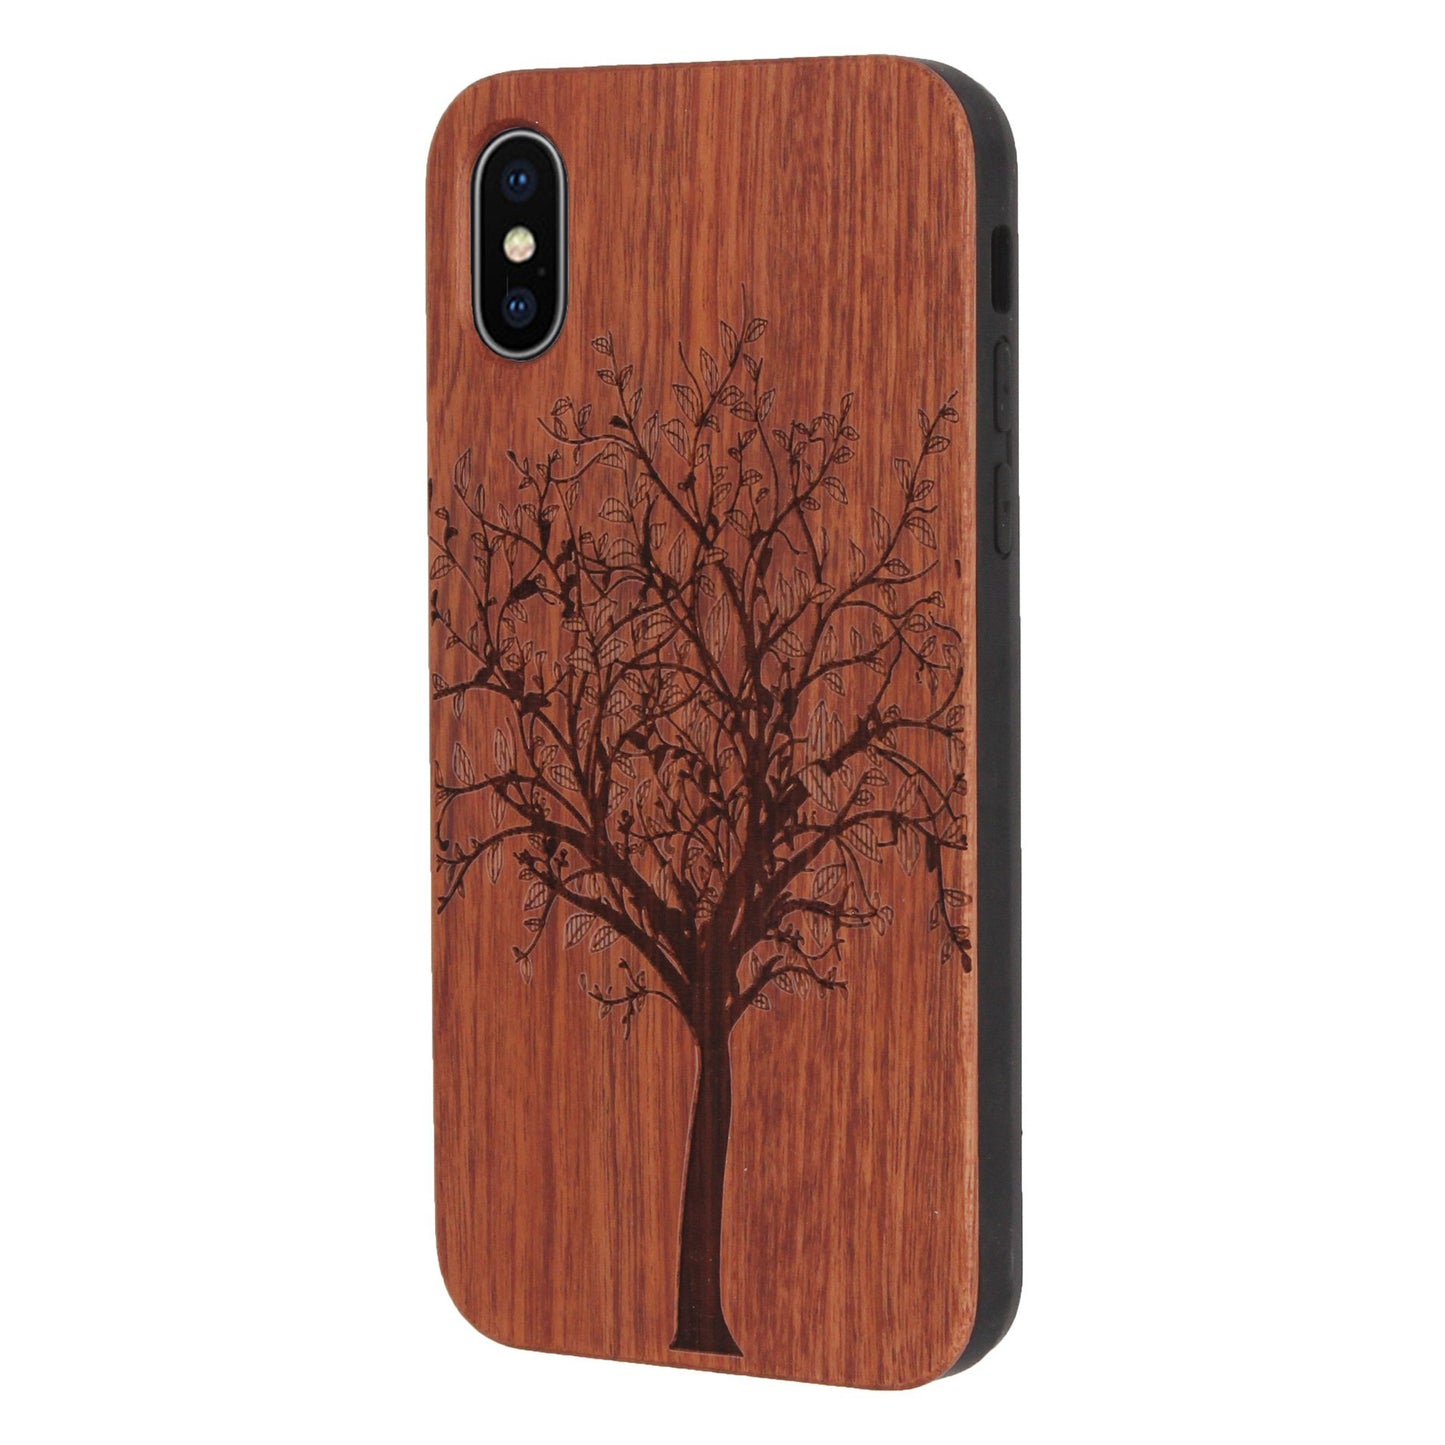 Tree of Life Eden Rosewood Case for iPhone XS Max